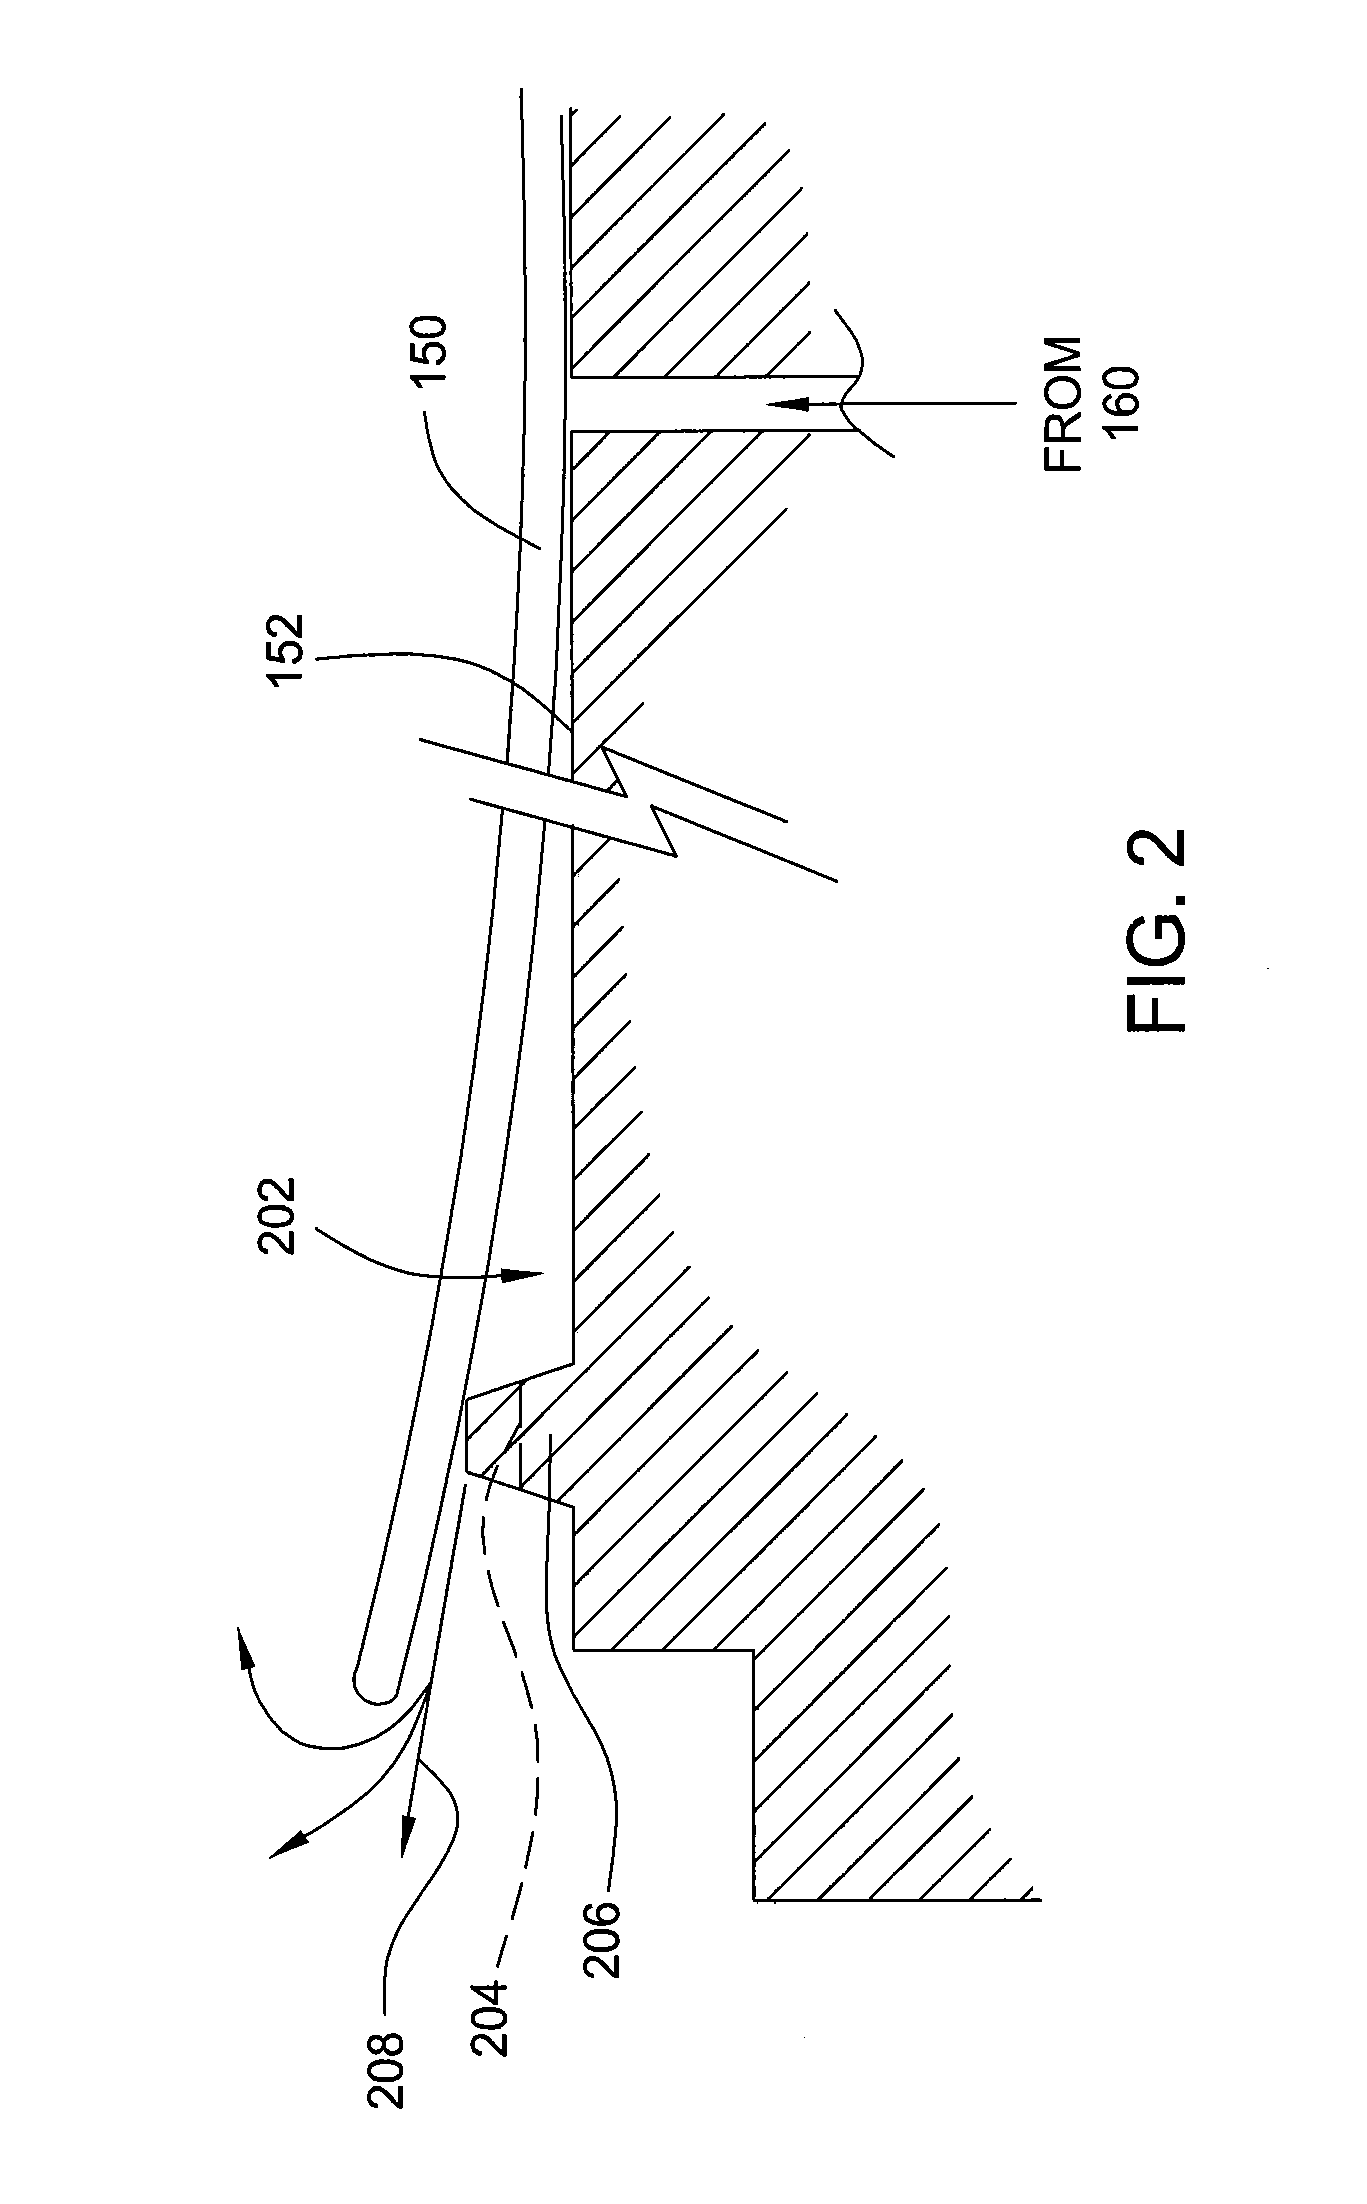 Method and apparatus for etching